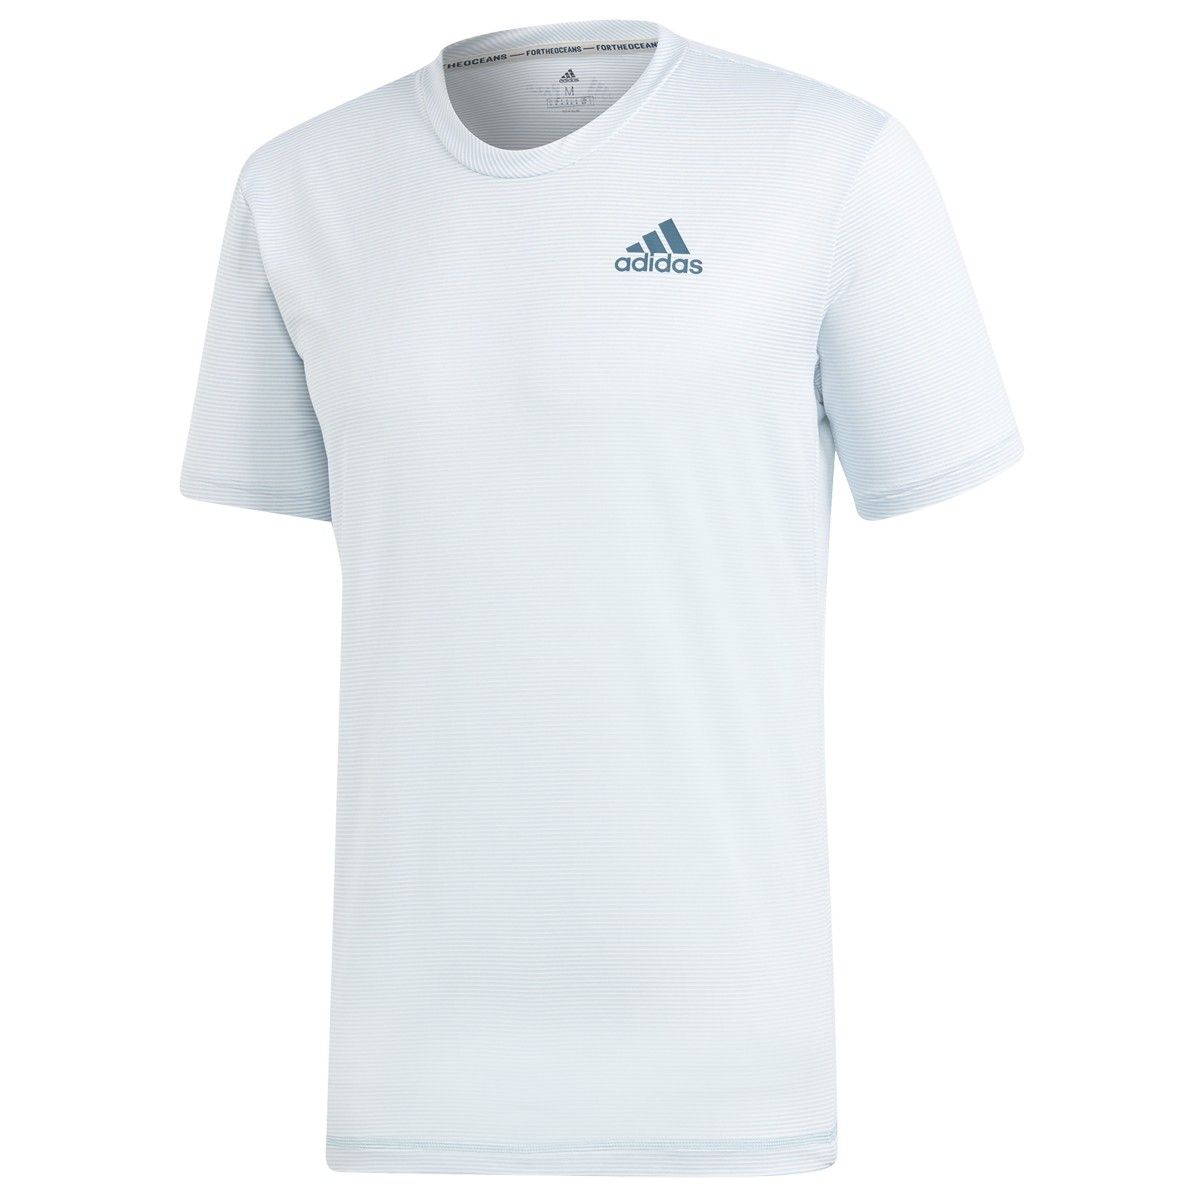 adidas Parley Striped Men's Tee DT4185